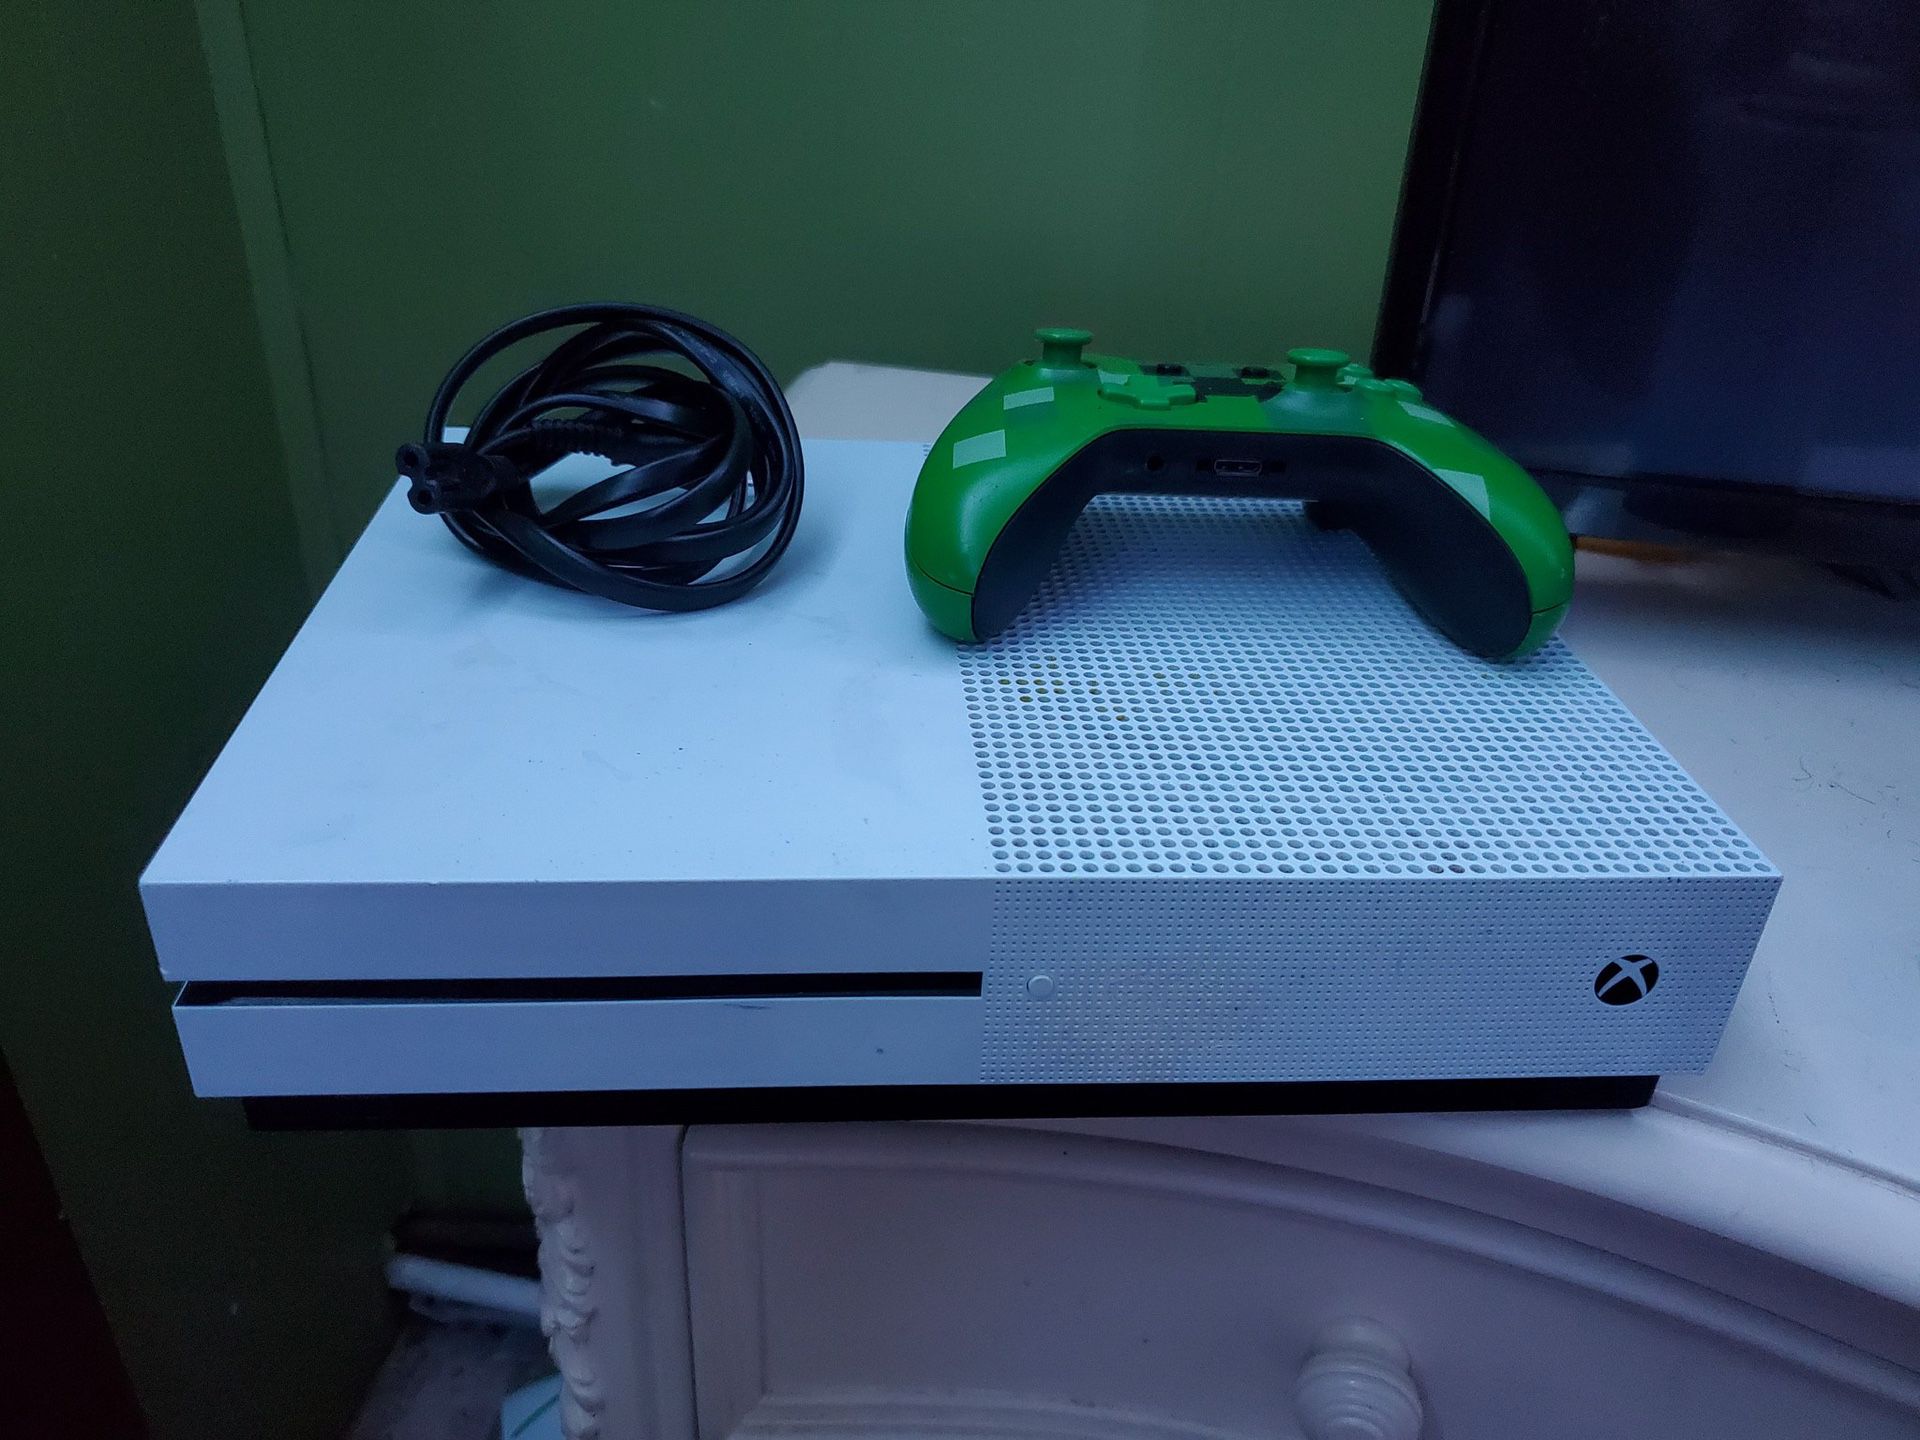 Xbox one s with power cord and working remote